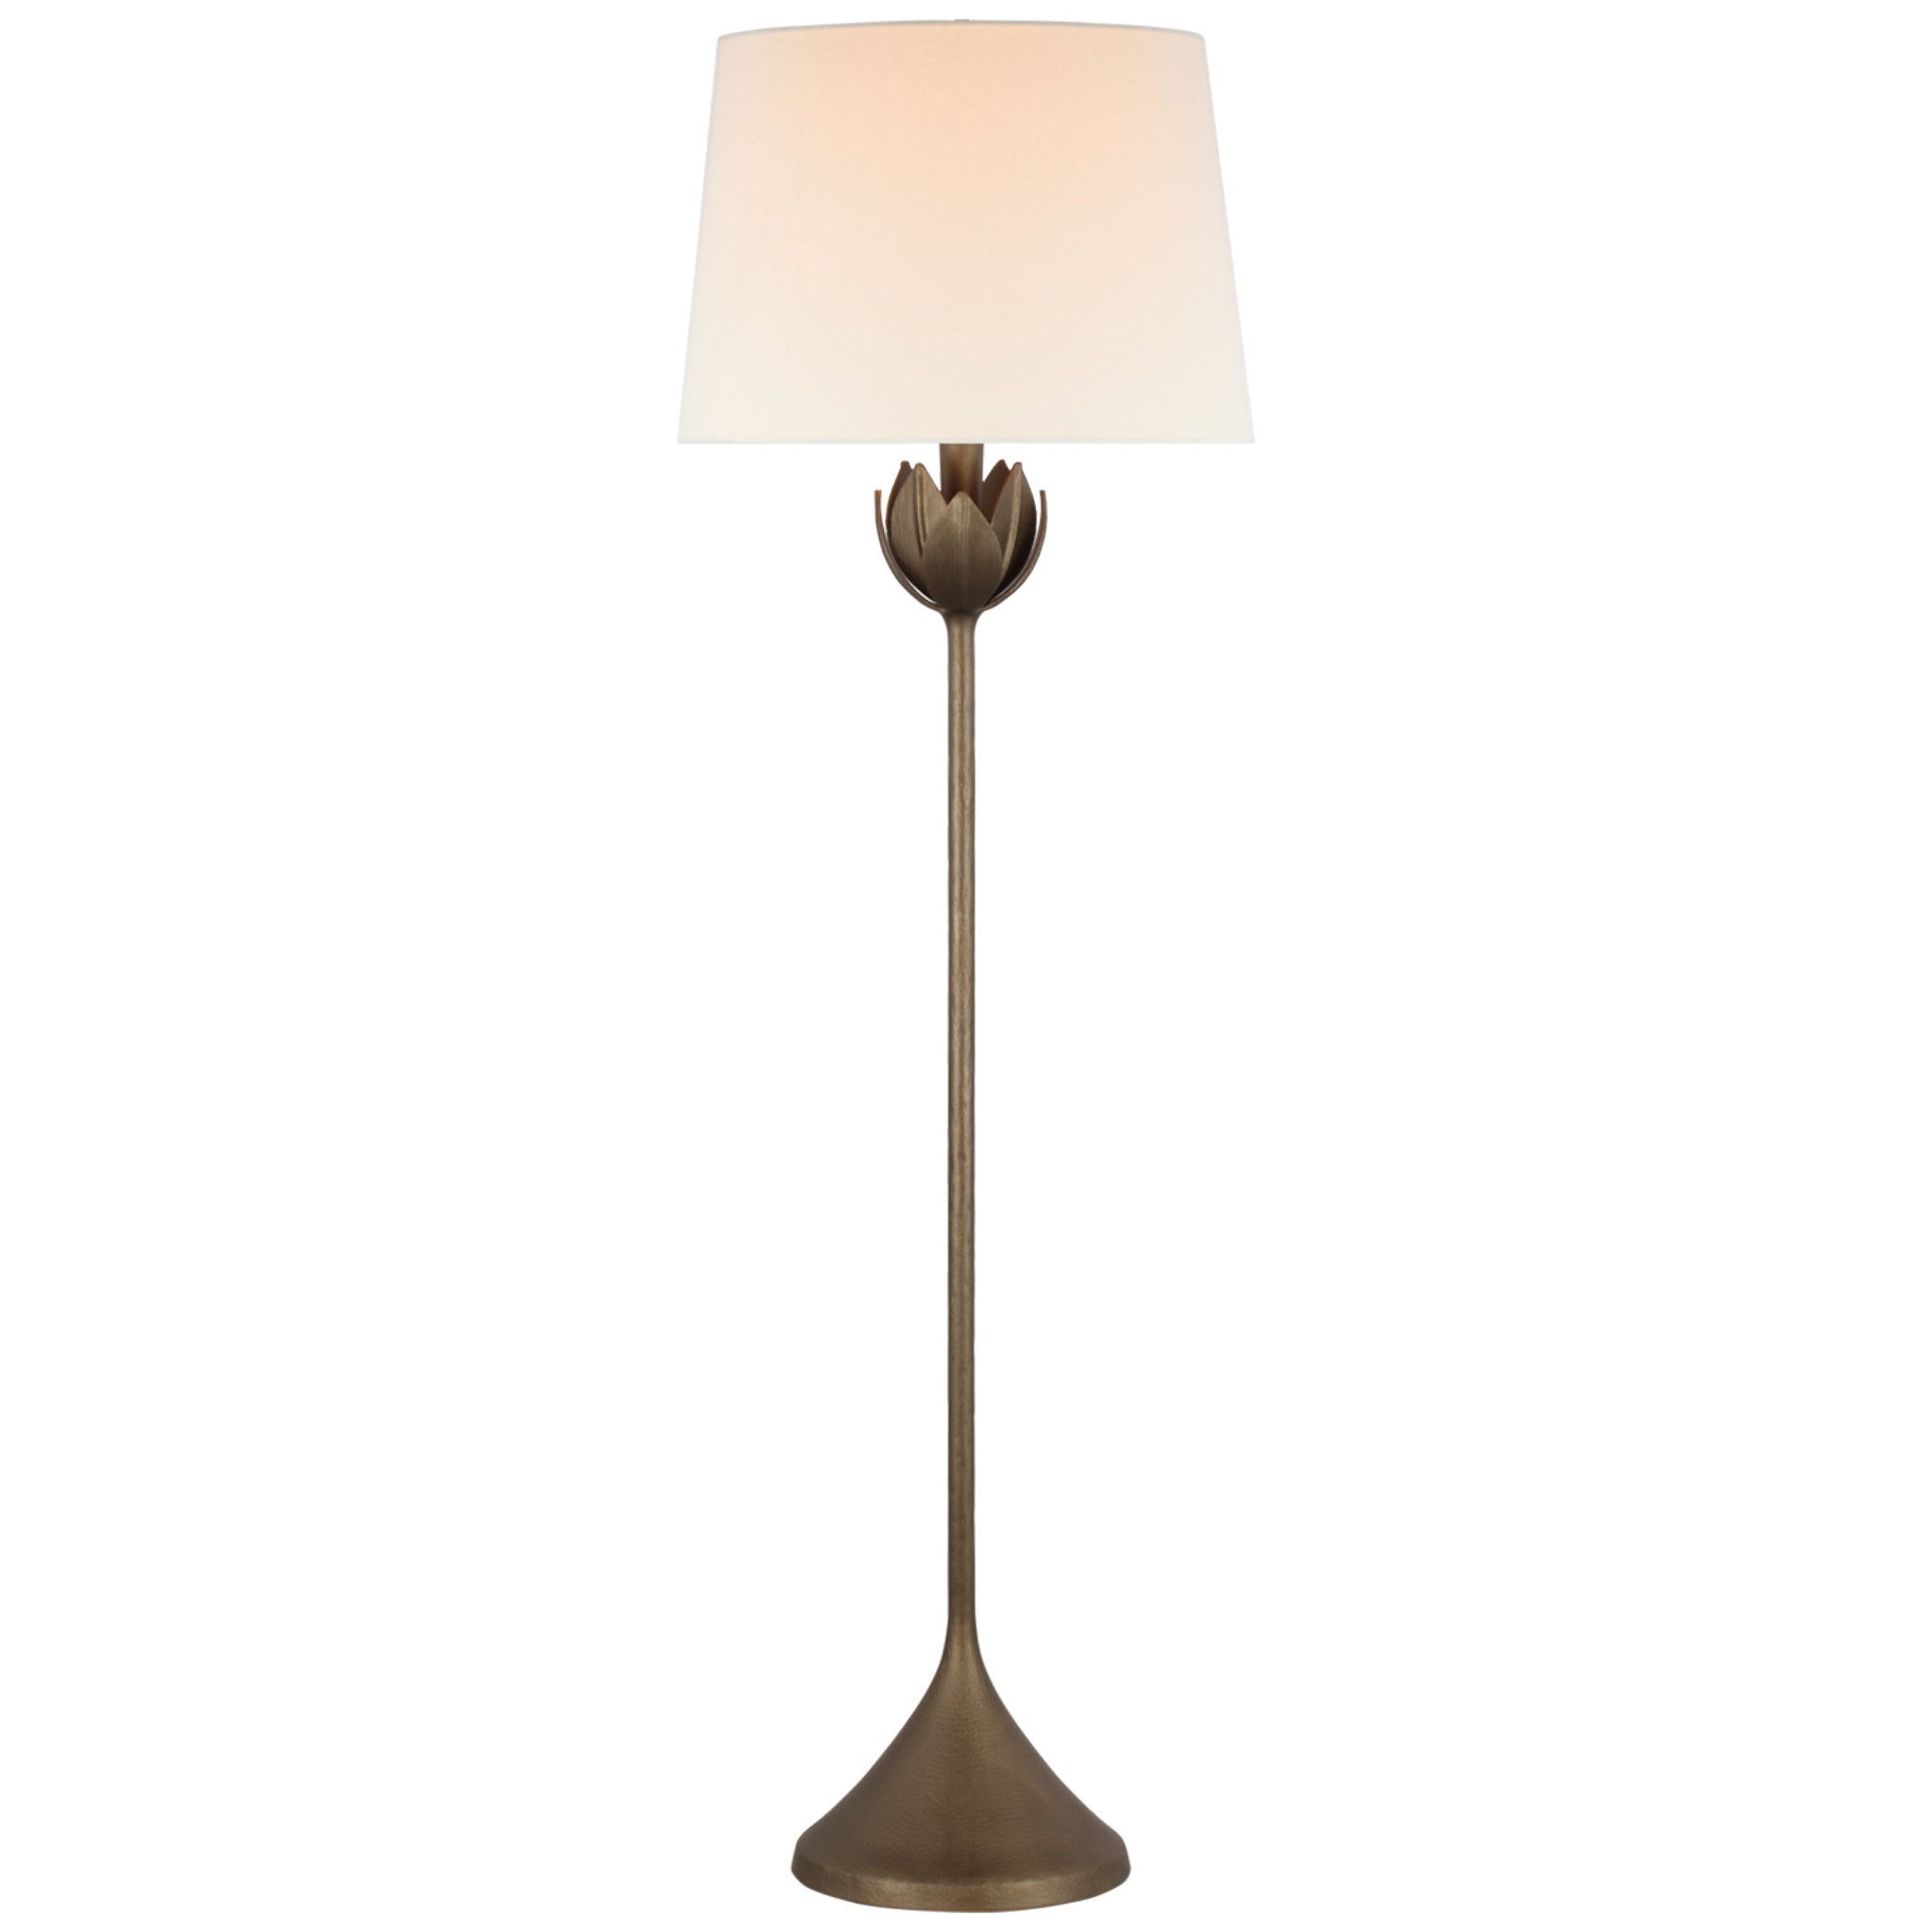 Julie Neill Alberto Large Floor Lamp in Antique Bronze Leaf with Linen Shade